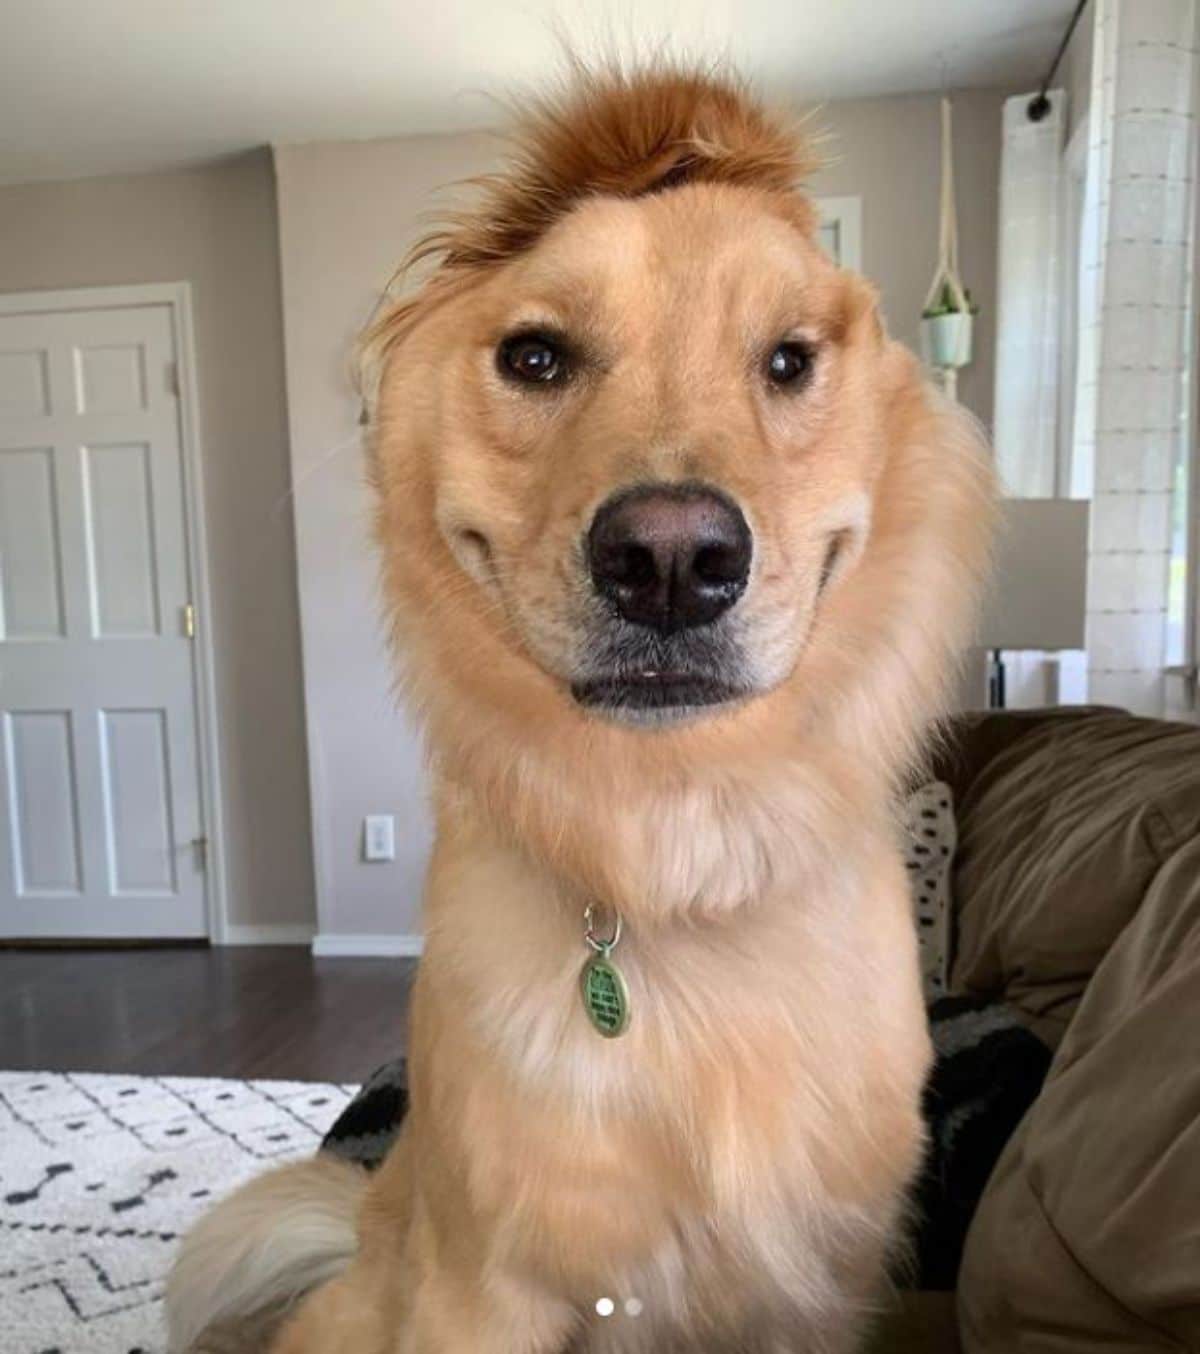 a golden retriever with one ear is sitting on a brown couch